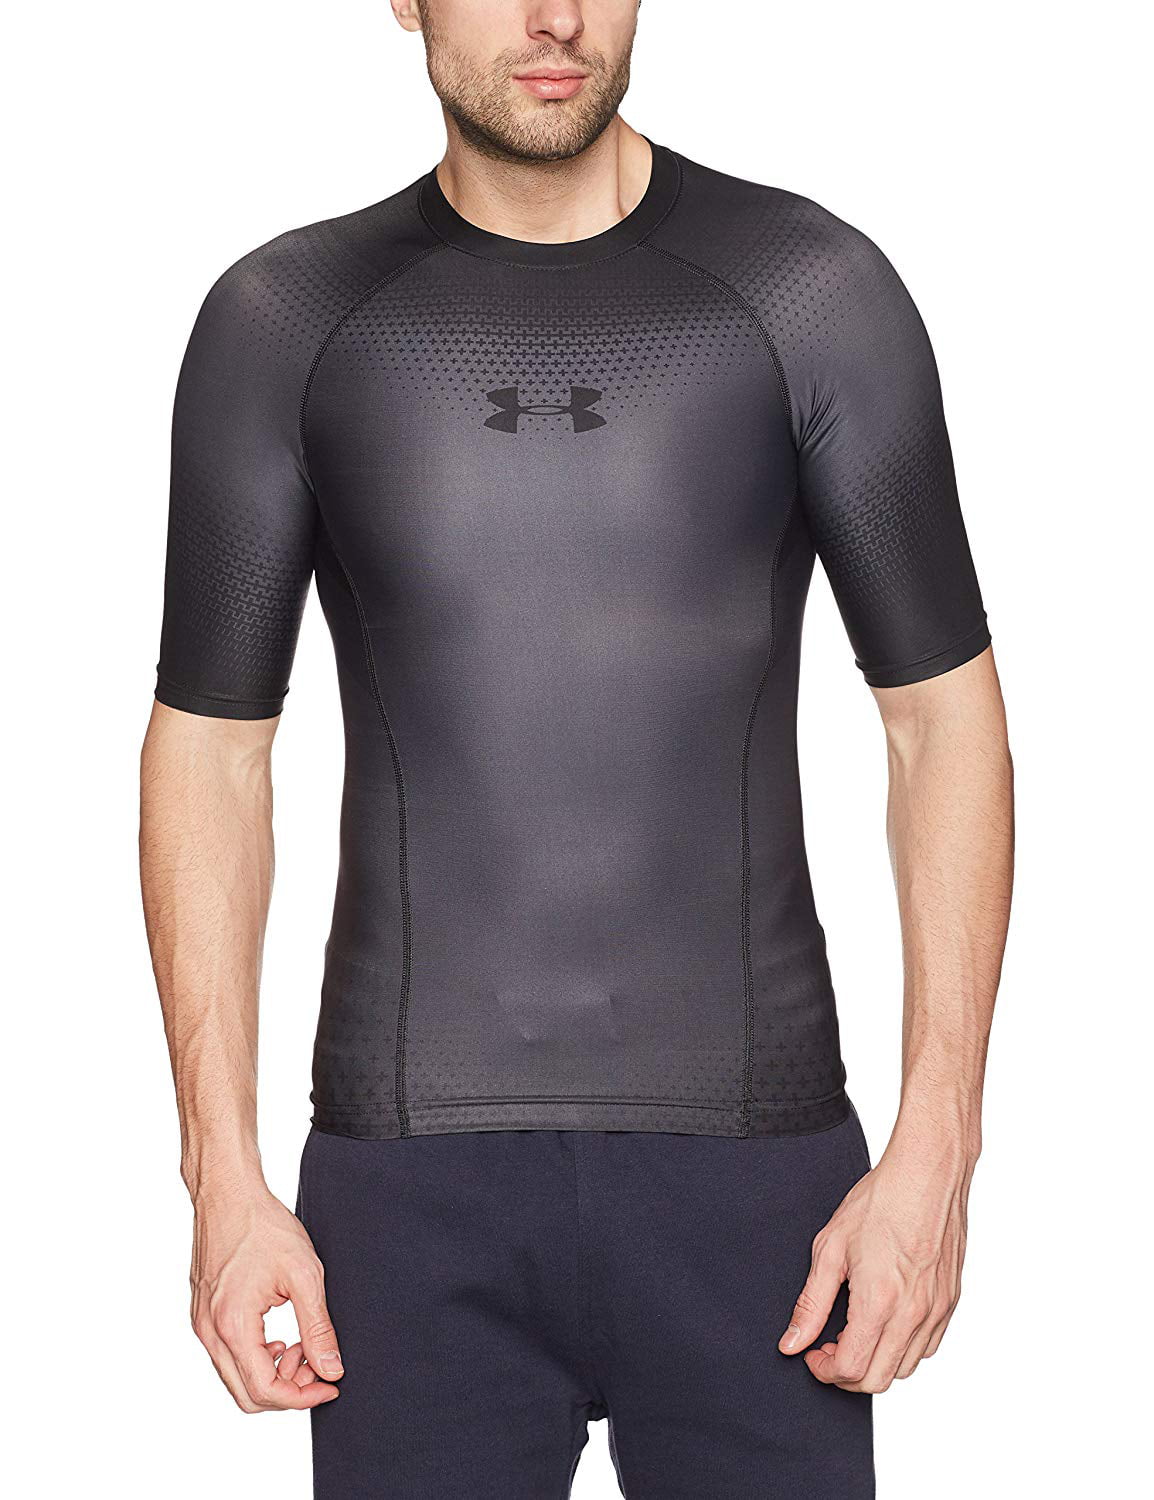 Under Armour - Mens Activewear Top Compression Short Sleeve 2XL ...